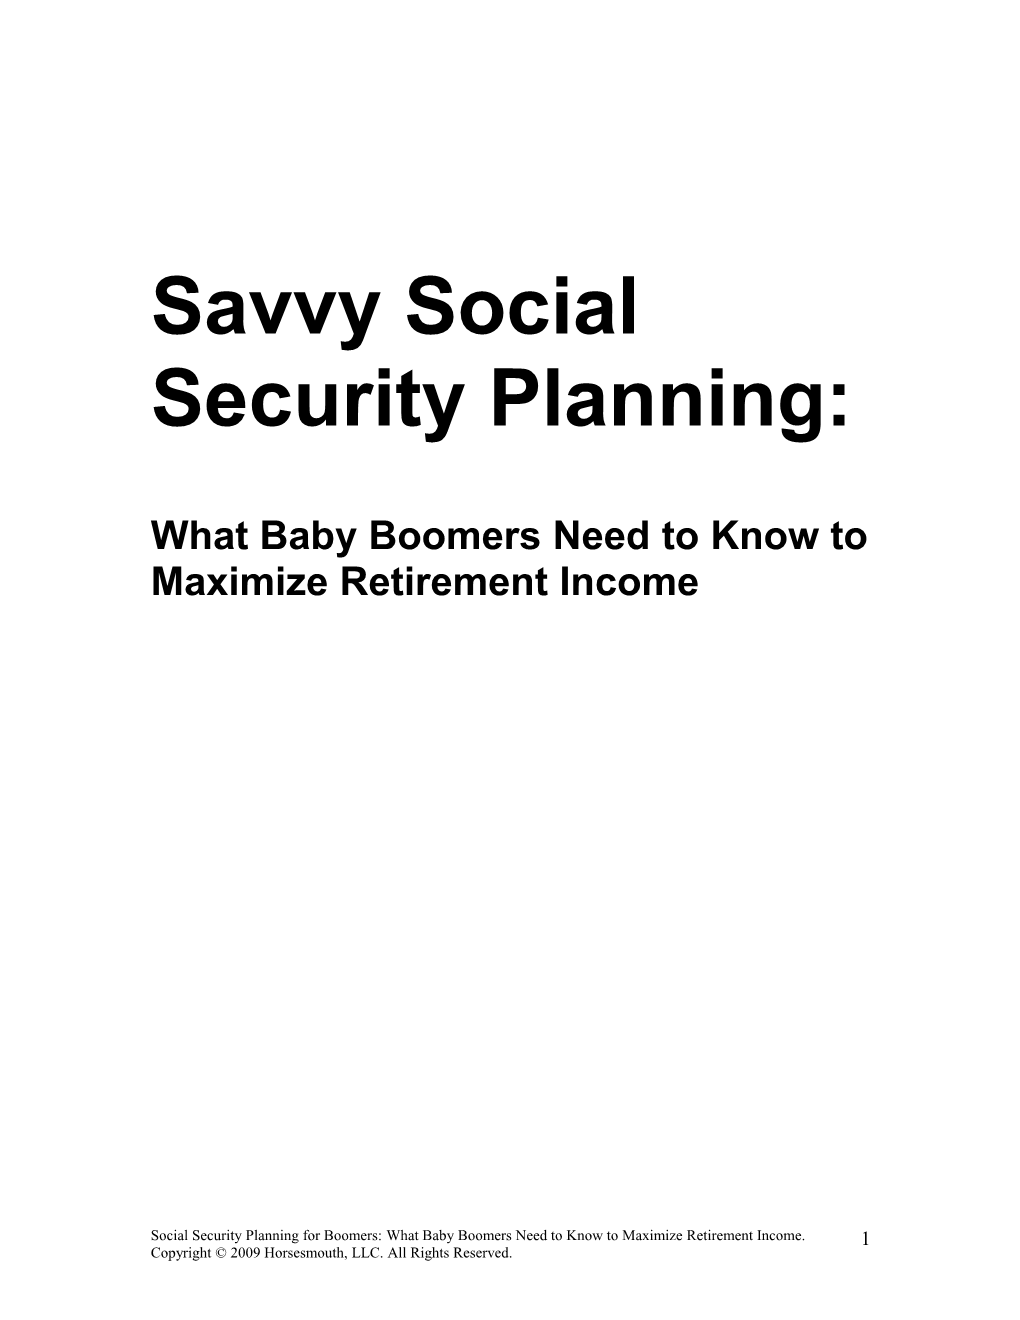 Profitable Social Security Planning for Boomers: What Everyone Needs to Know to Maximize